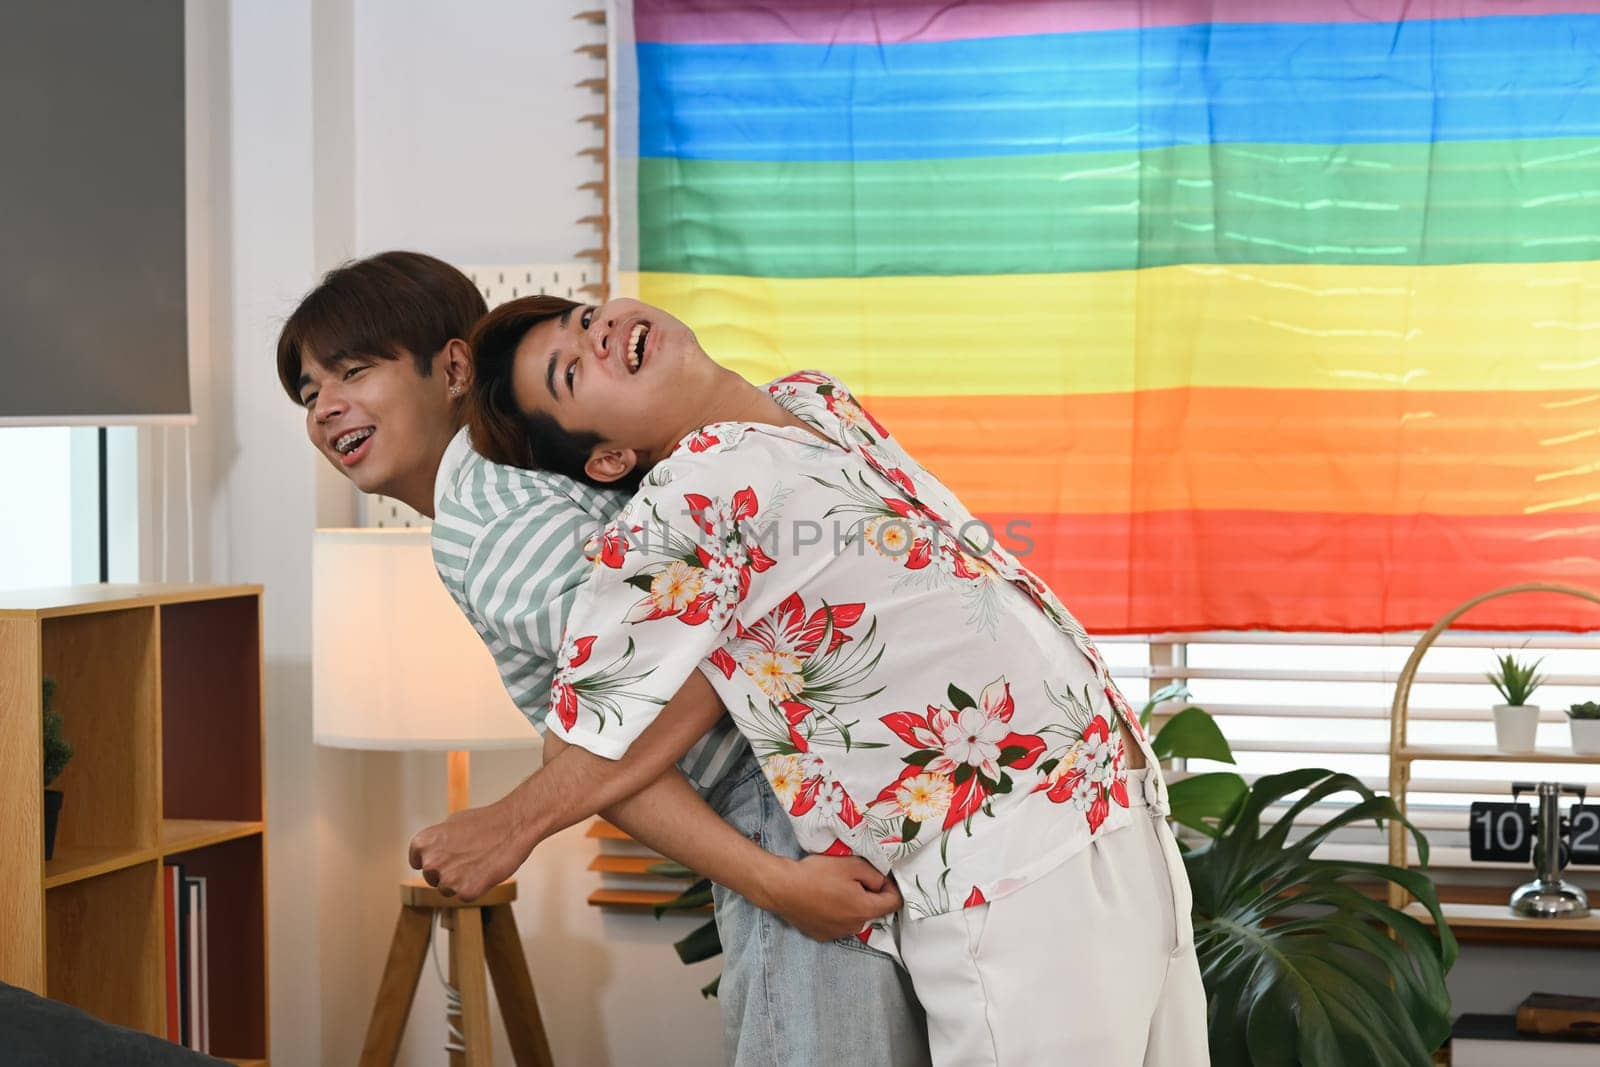 Playful gay couple giving piggyback ride for each other laugh joyfully in living room near rainbow LGBT Pride flag by prathanchorruangsak